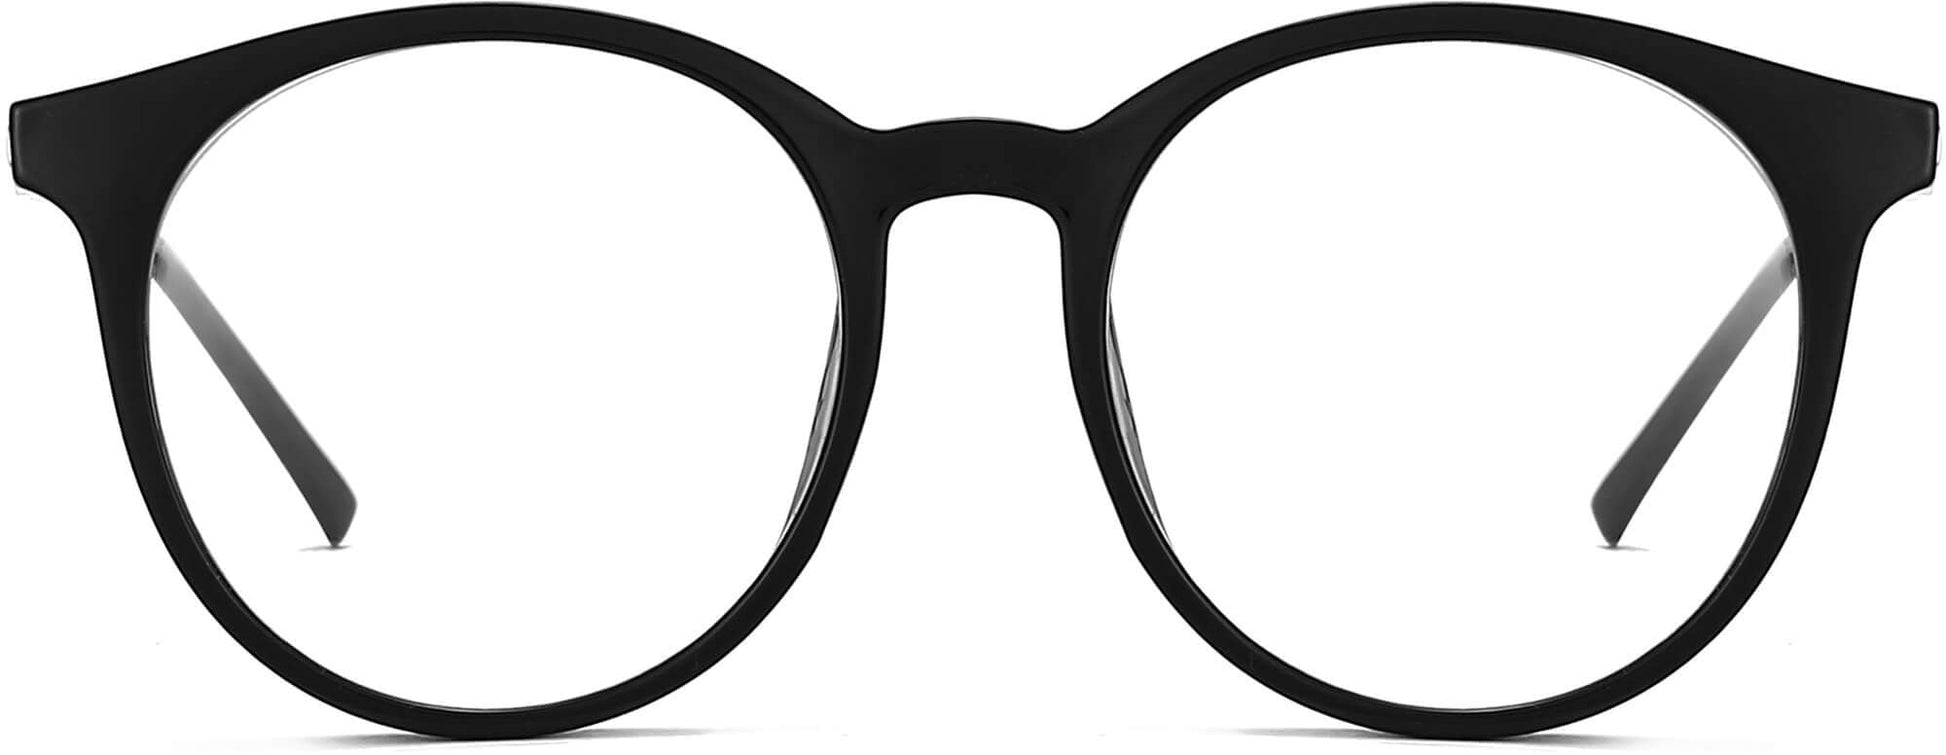 Afra Round Black Eyeglasses from ANRRI, front view